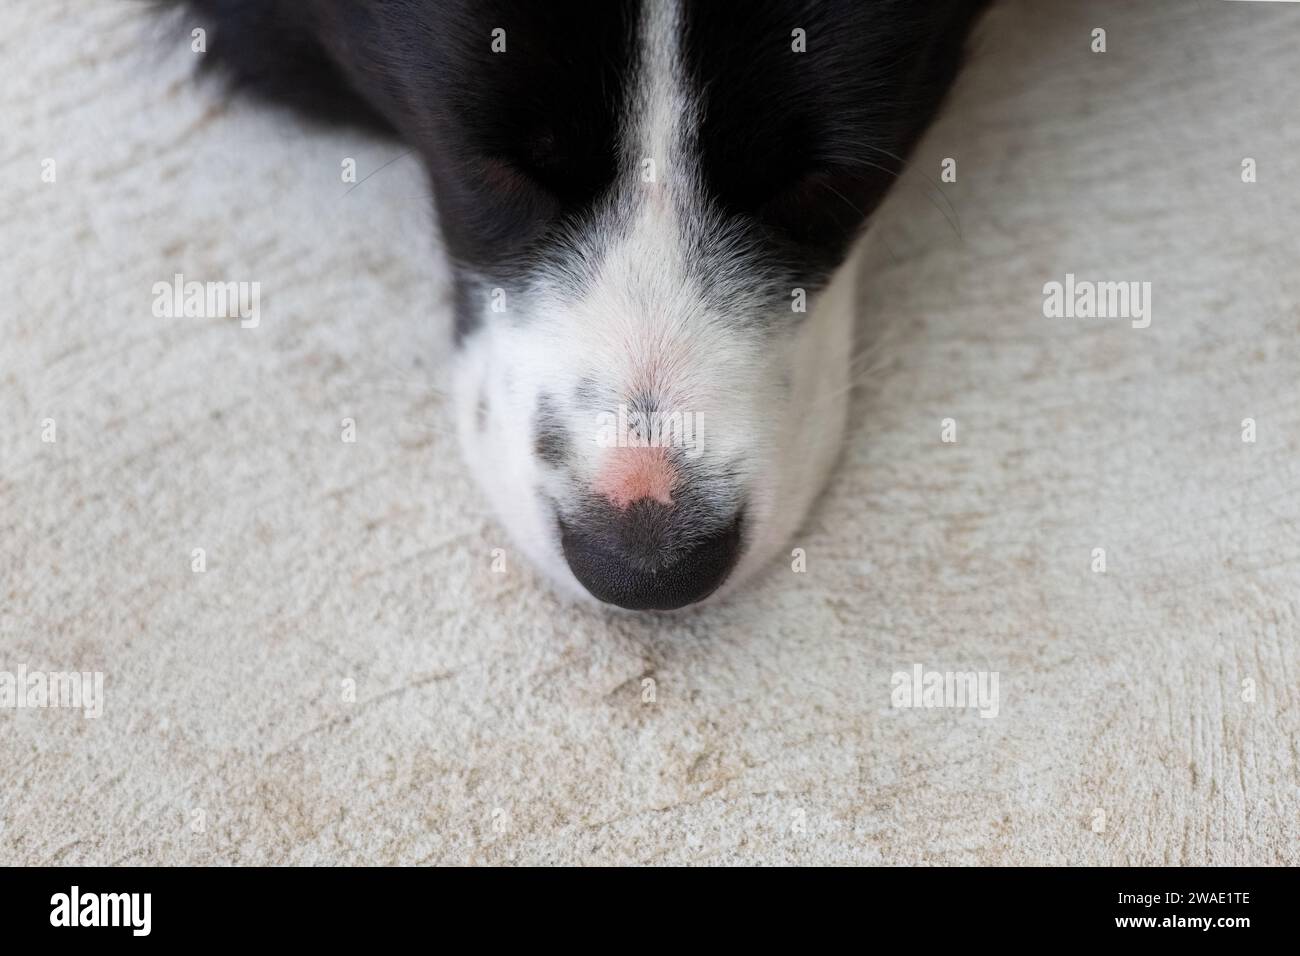 Close up of the border collie puppy nose. Close up of a dog's snout. Dog lying on a concrete floor. Stock Photo